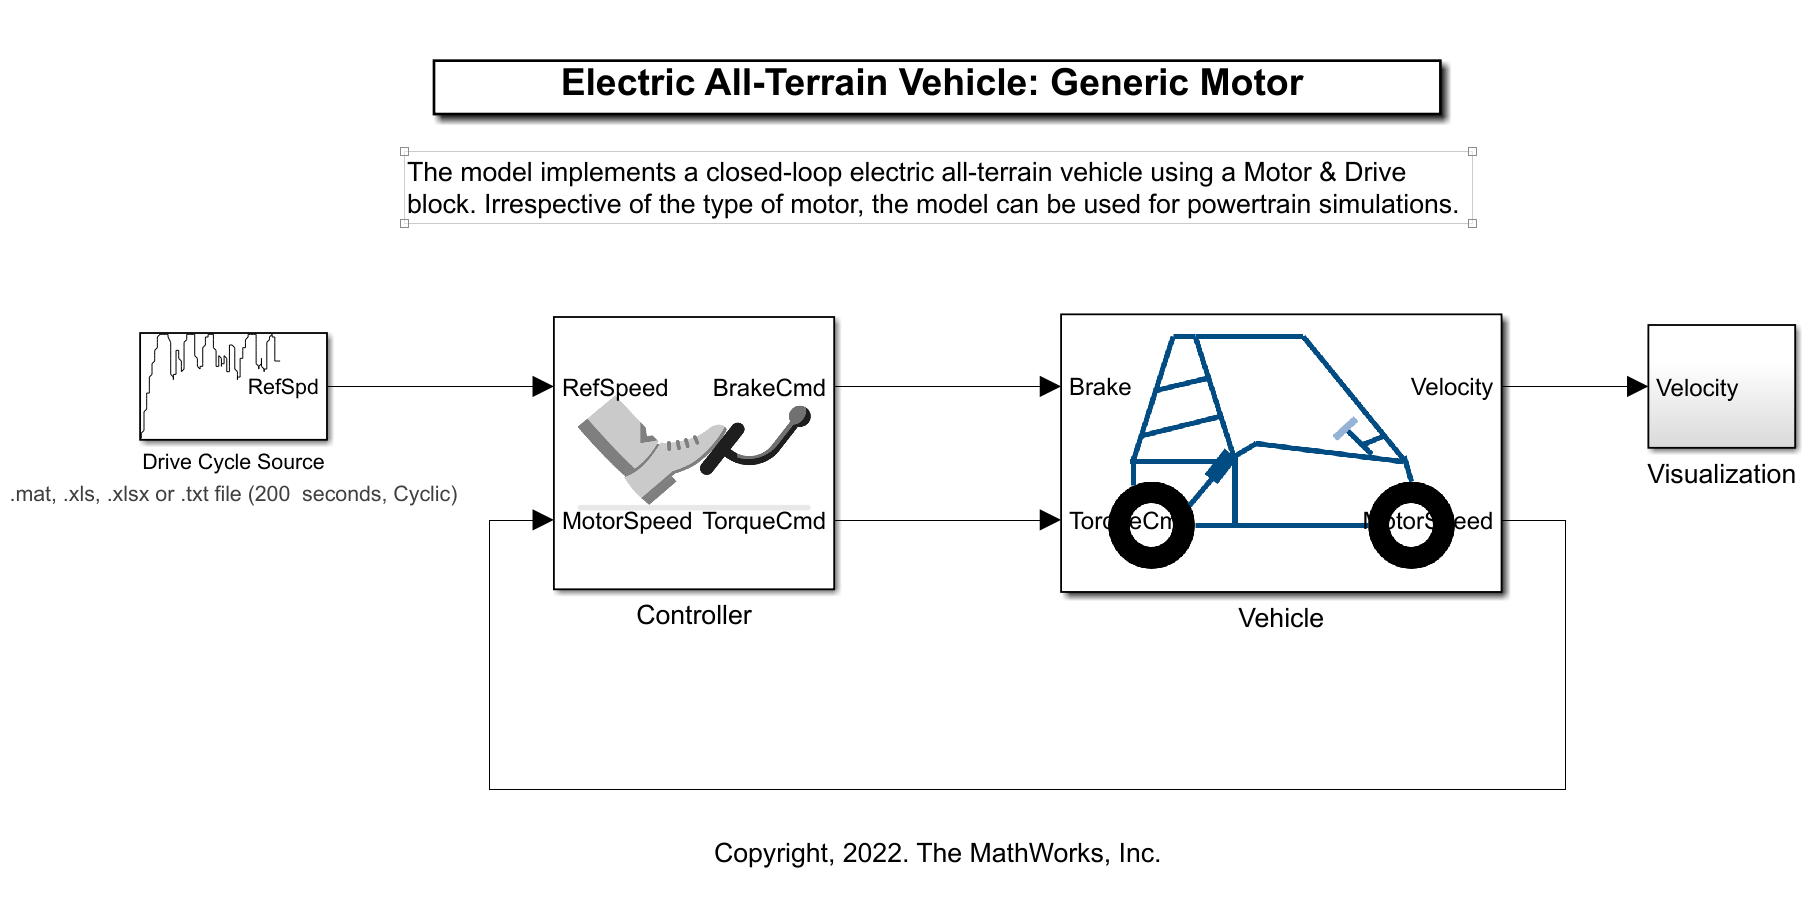 Electric Vehicle Powered by BLDC Motor File Exchange MATLAB Central